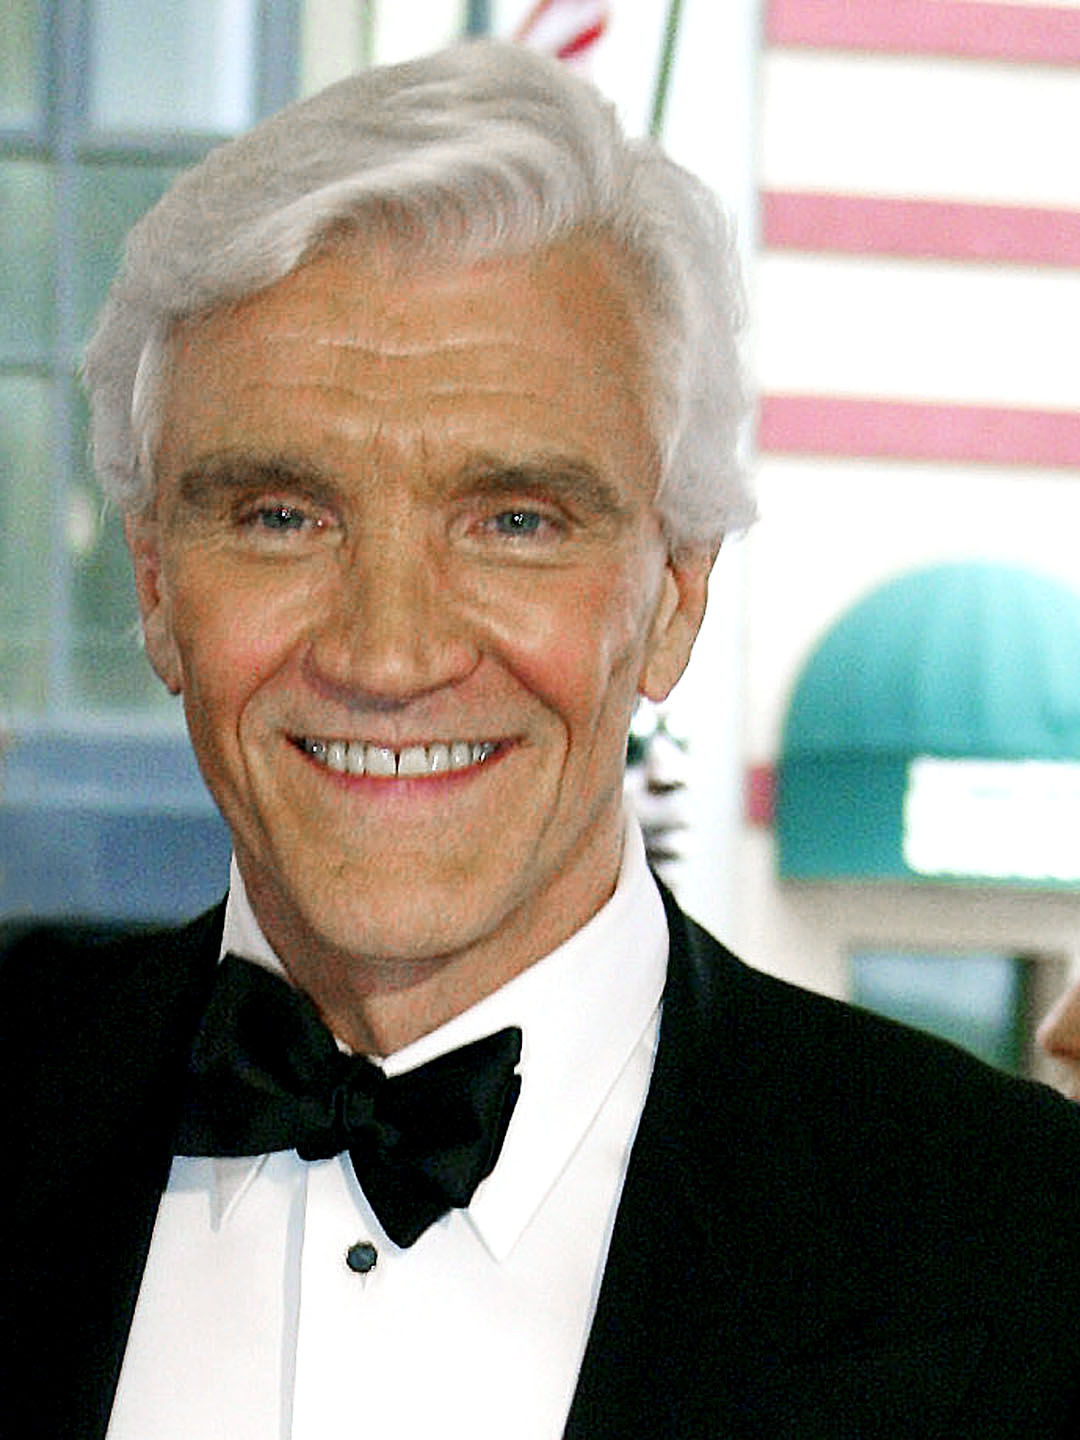 How tall is David Canary?